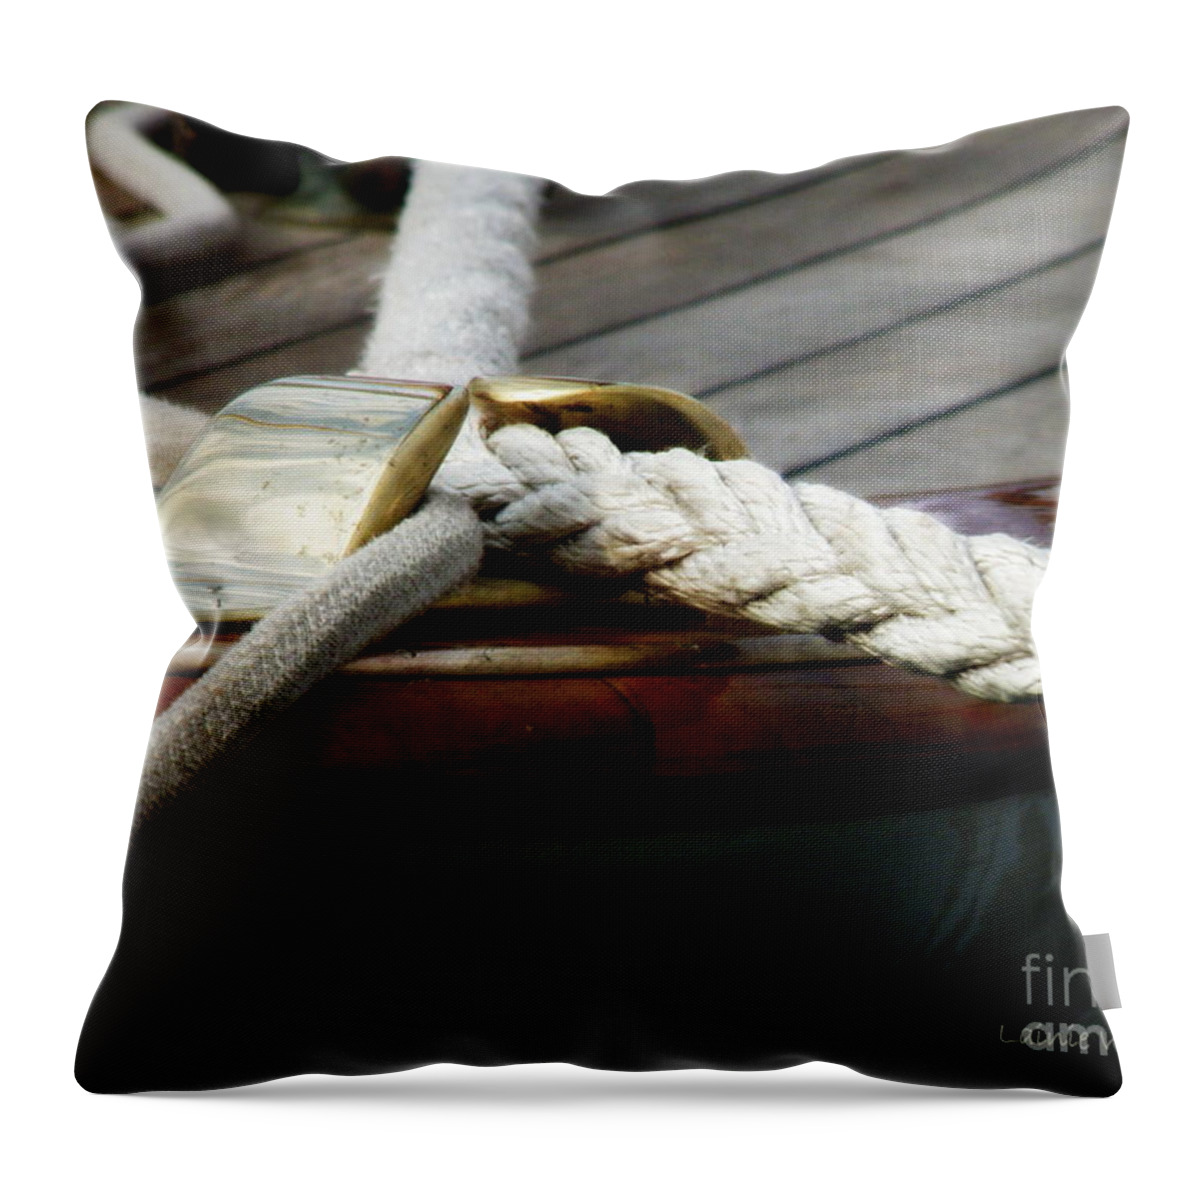 Nautical Throw Pillow featuring the photograph Nautical Textures by Lainie Wrightson